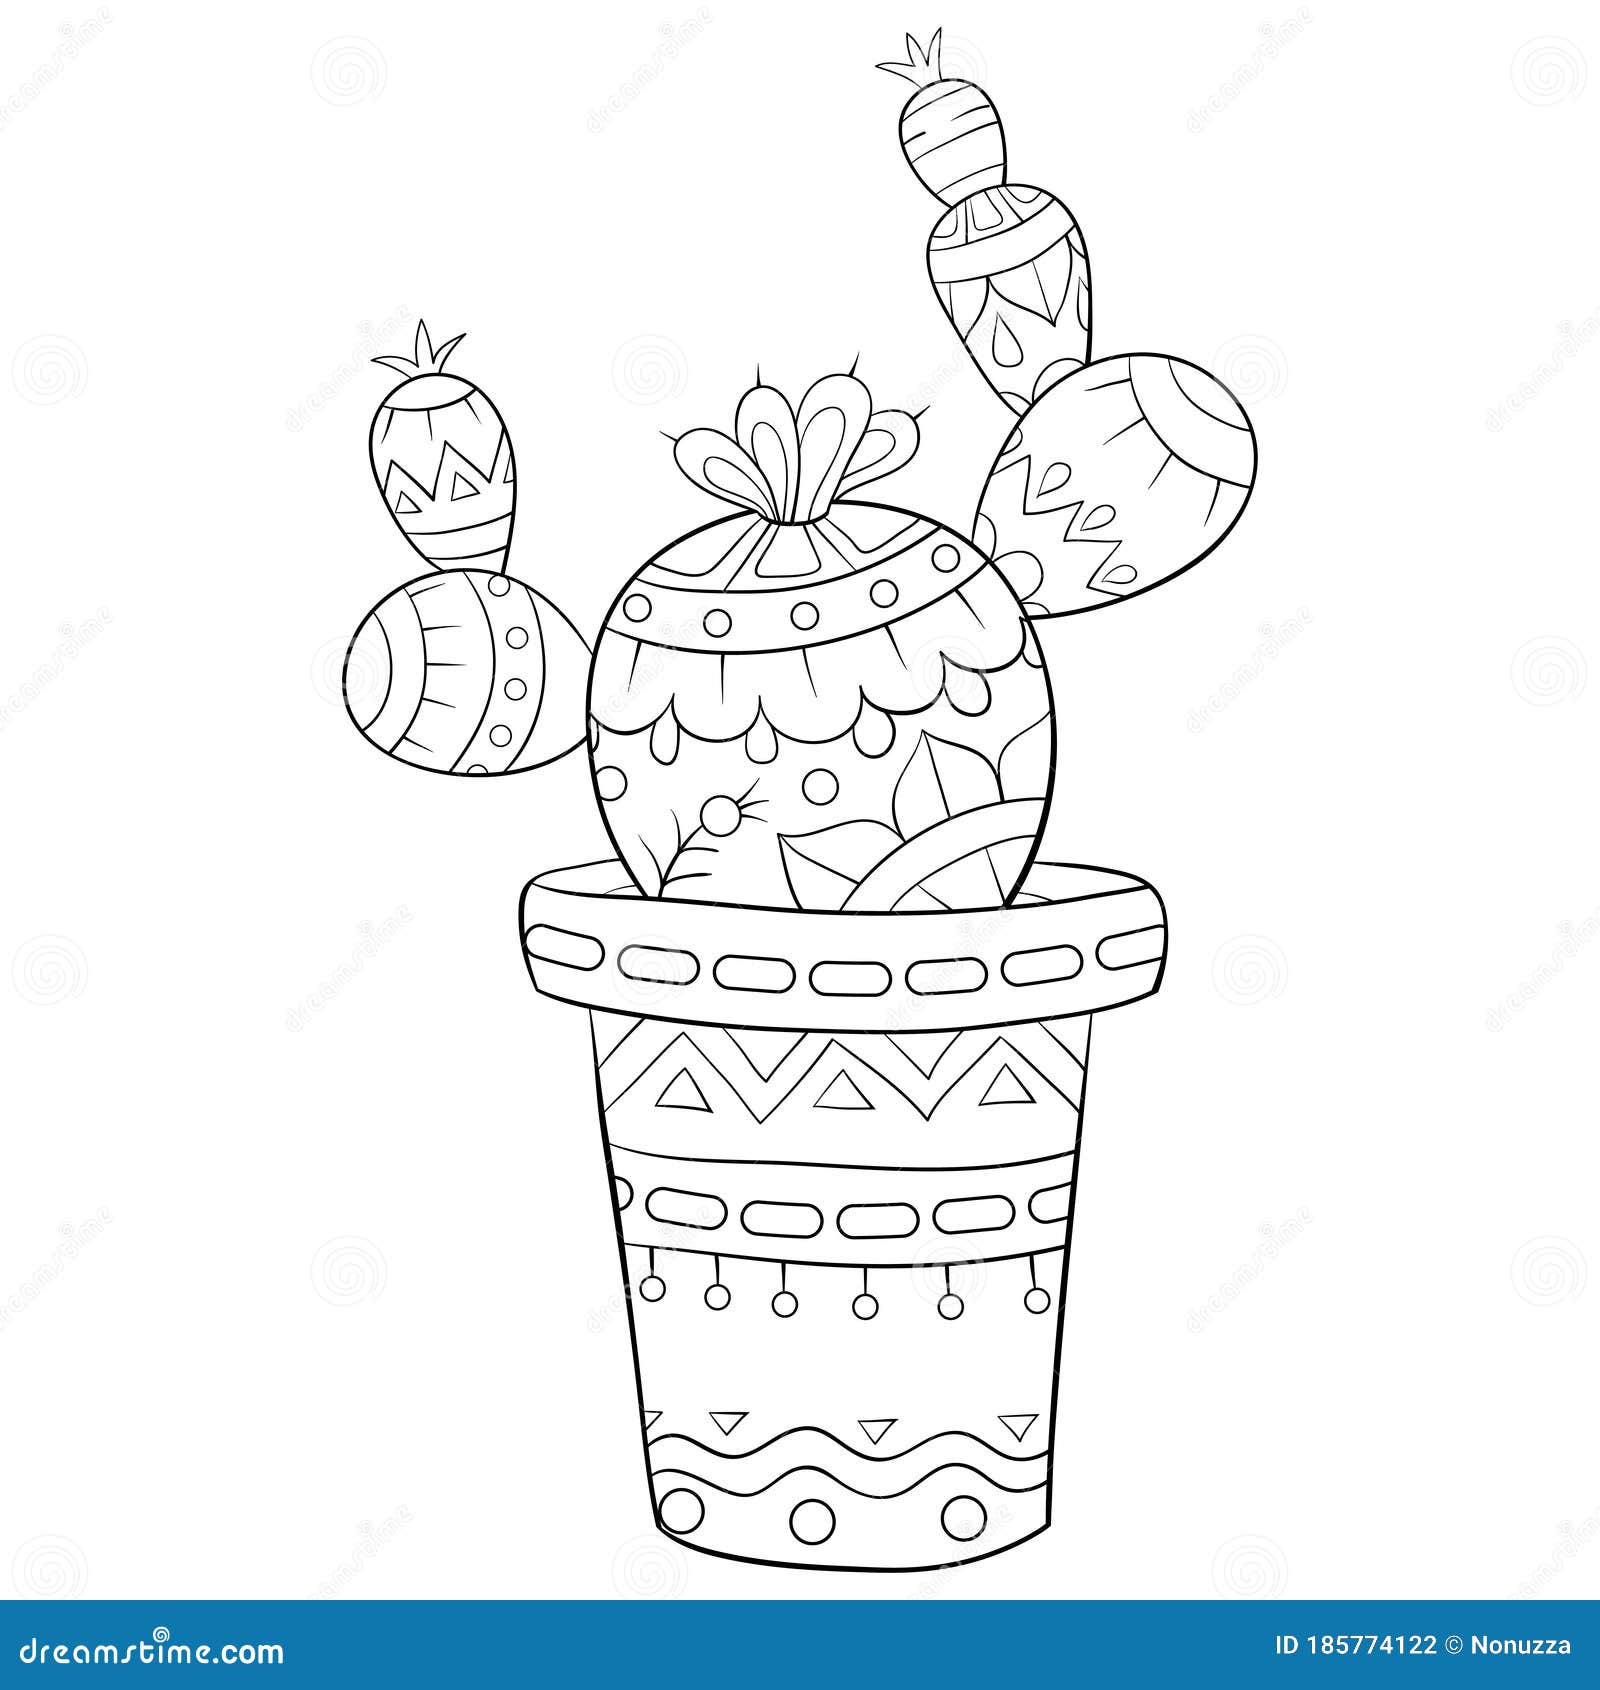 Printable Cactus Coloring Pages, Set of 3 Coloring Sheets for